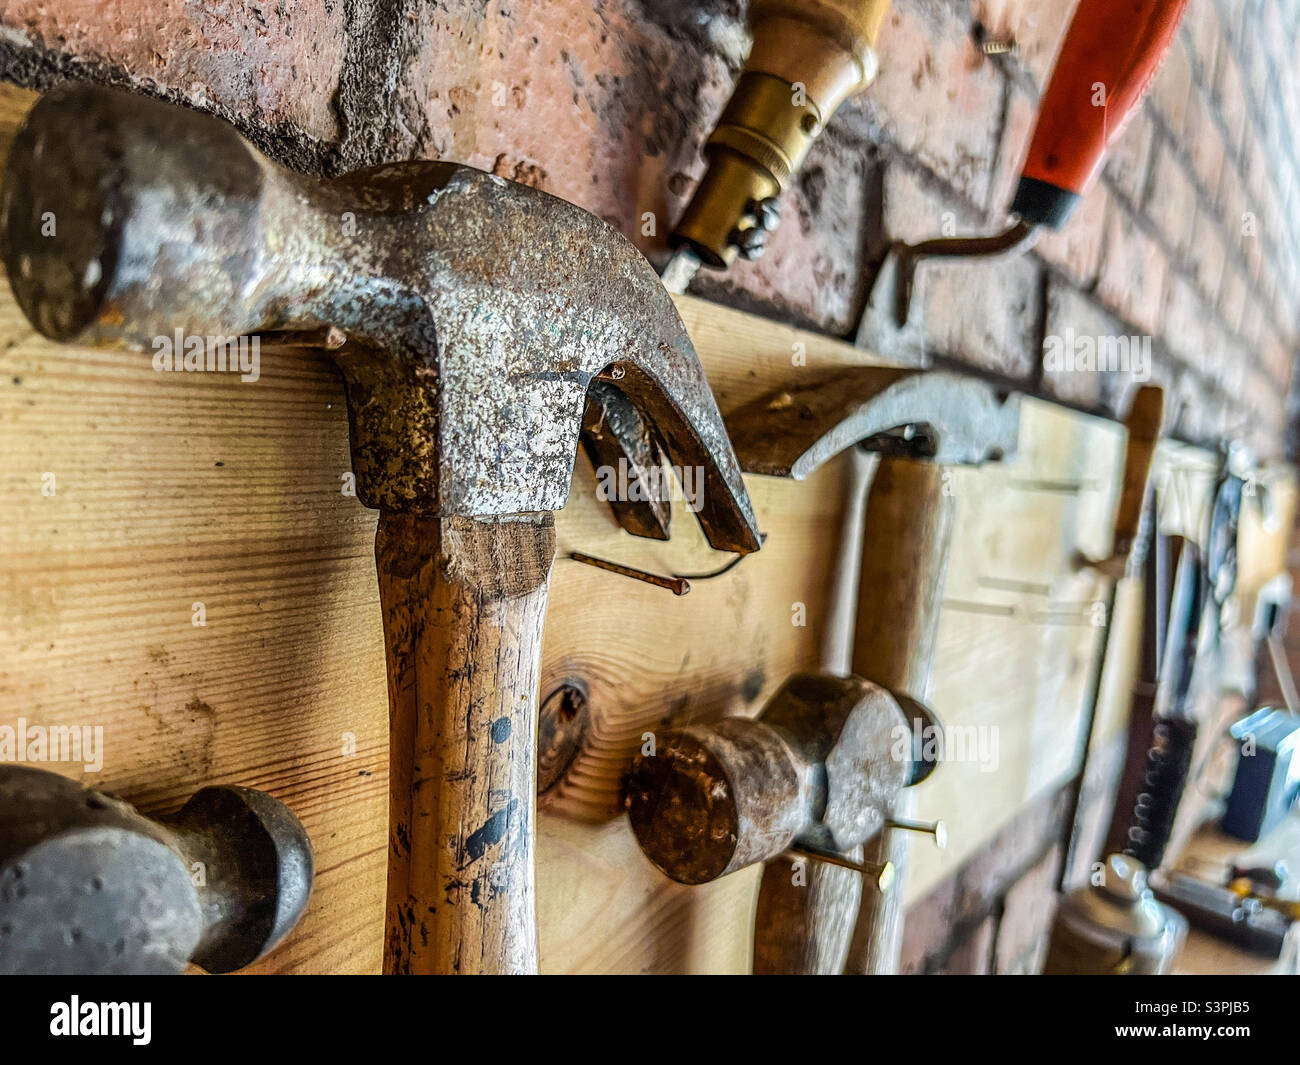 Tools including claw hammers hung on wall Stock Photo